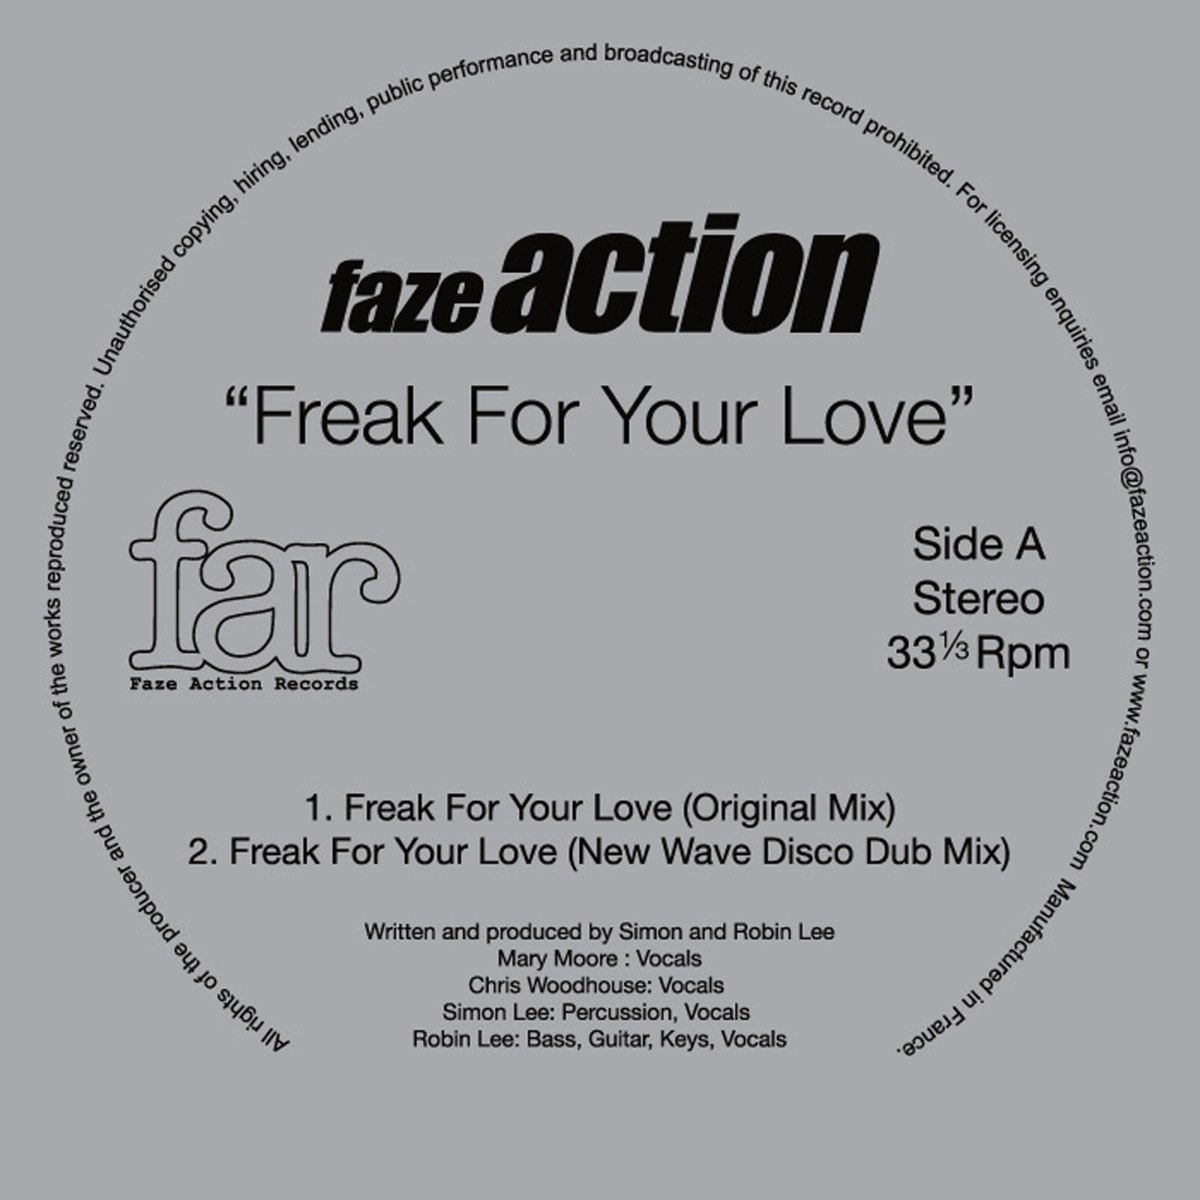 Your love remixes. For your Love. Freak stop Flow. On my own Living on Video (Dub Mix).